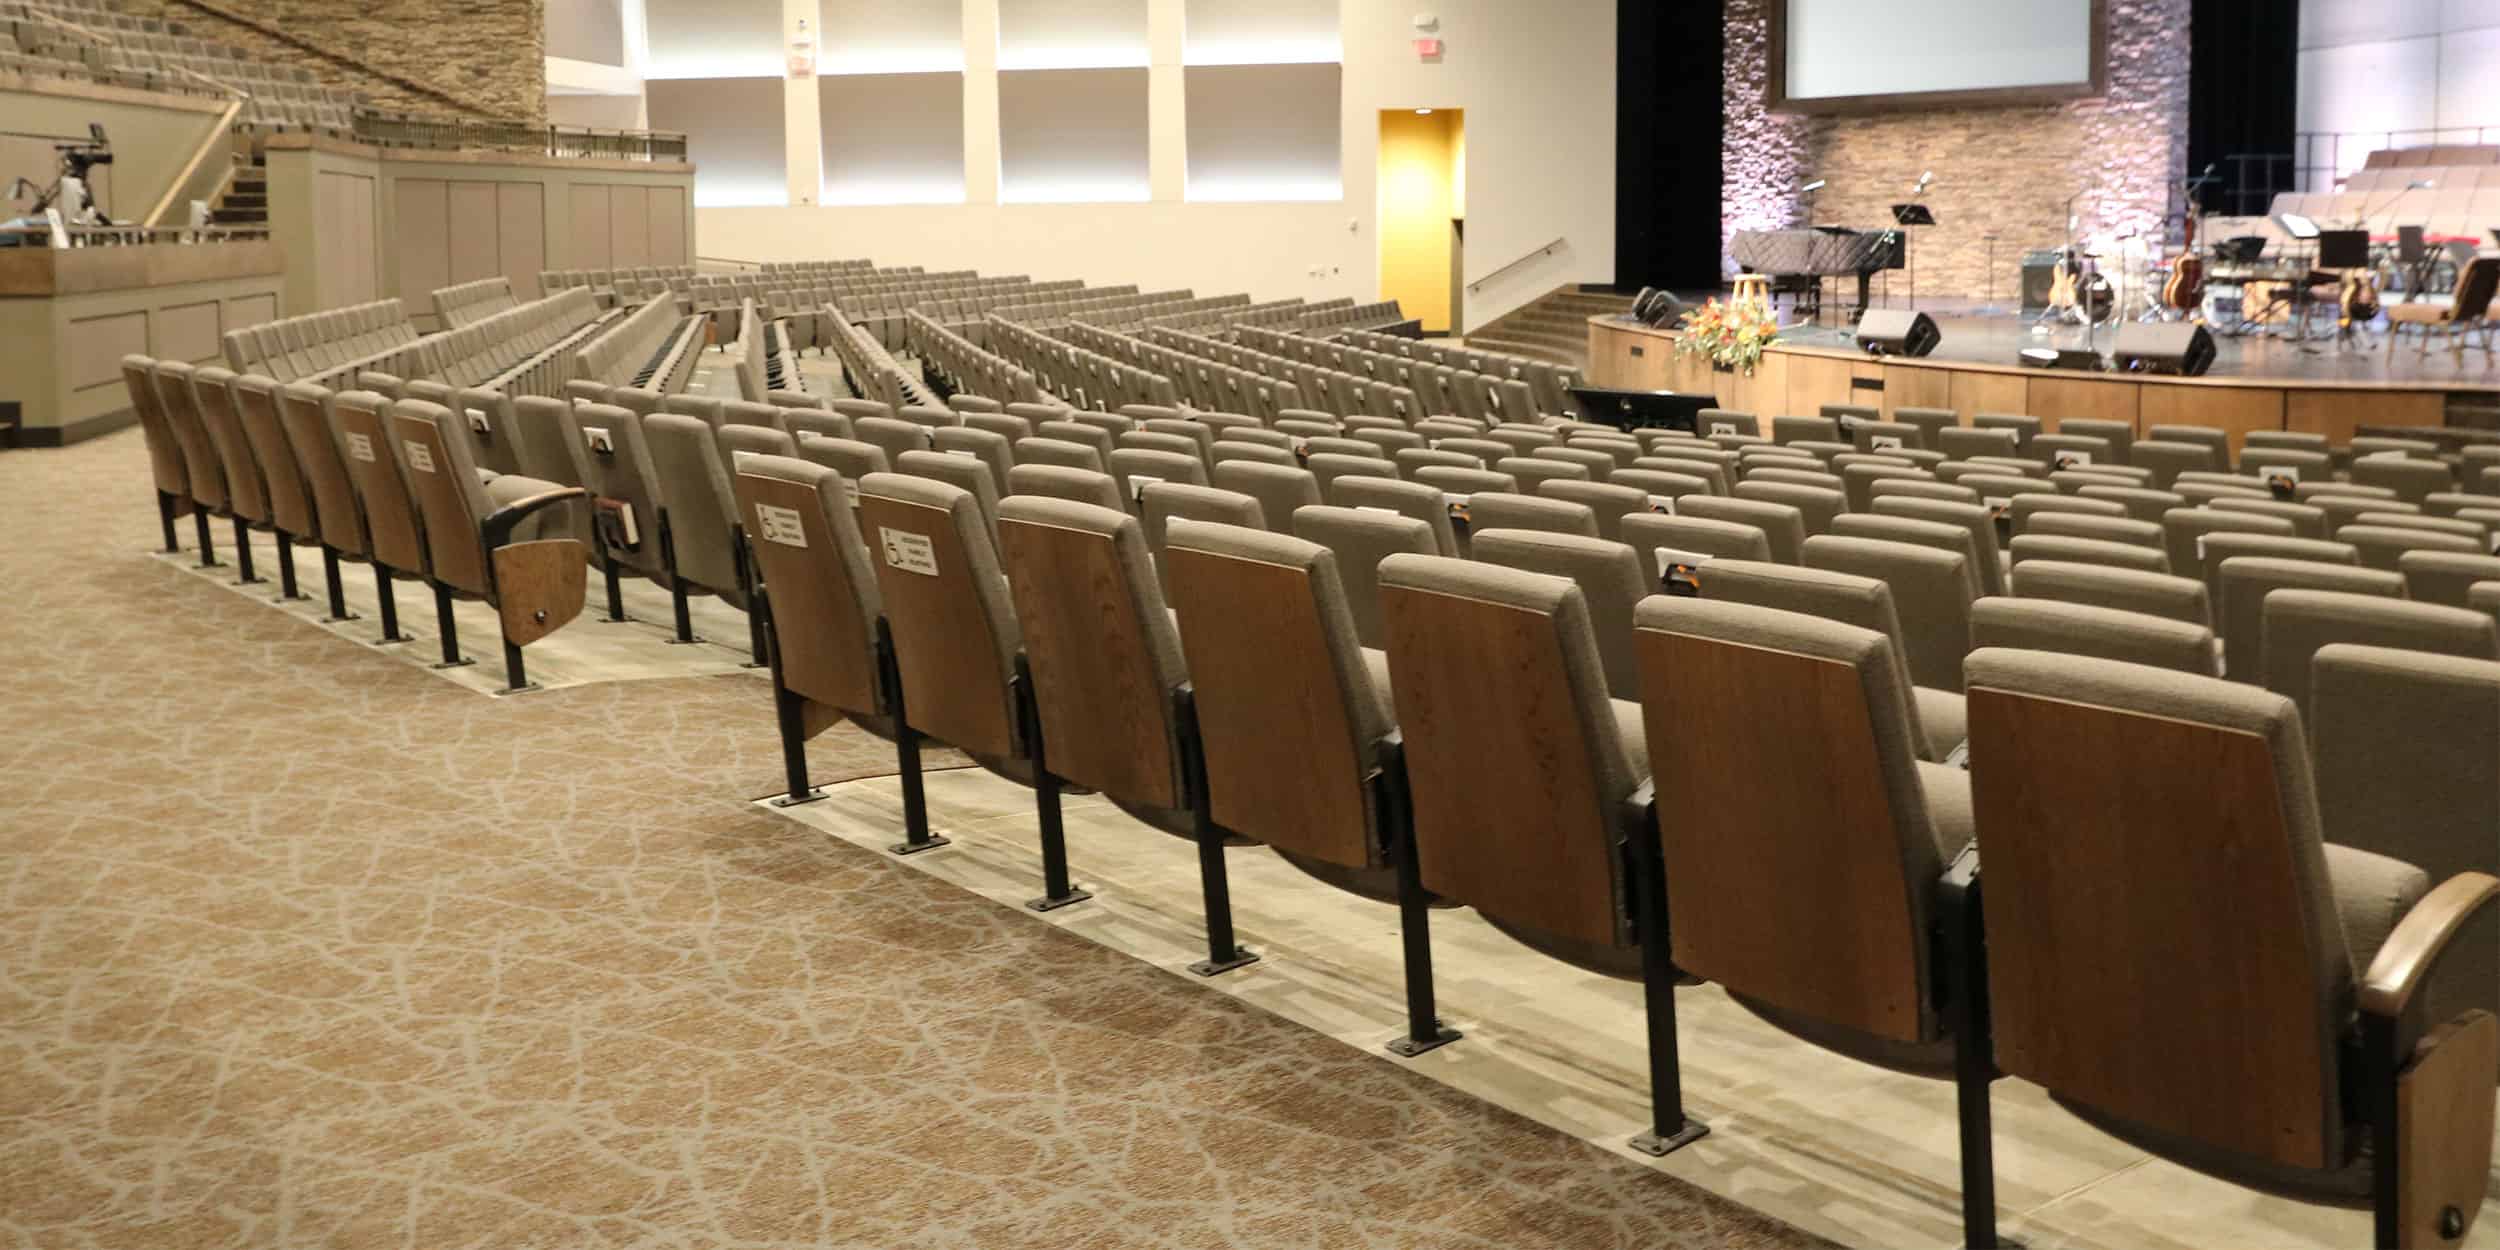 Auditorium seats with wood backs in a house of worship